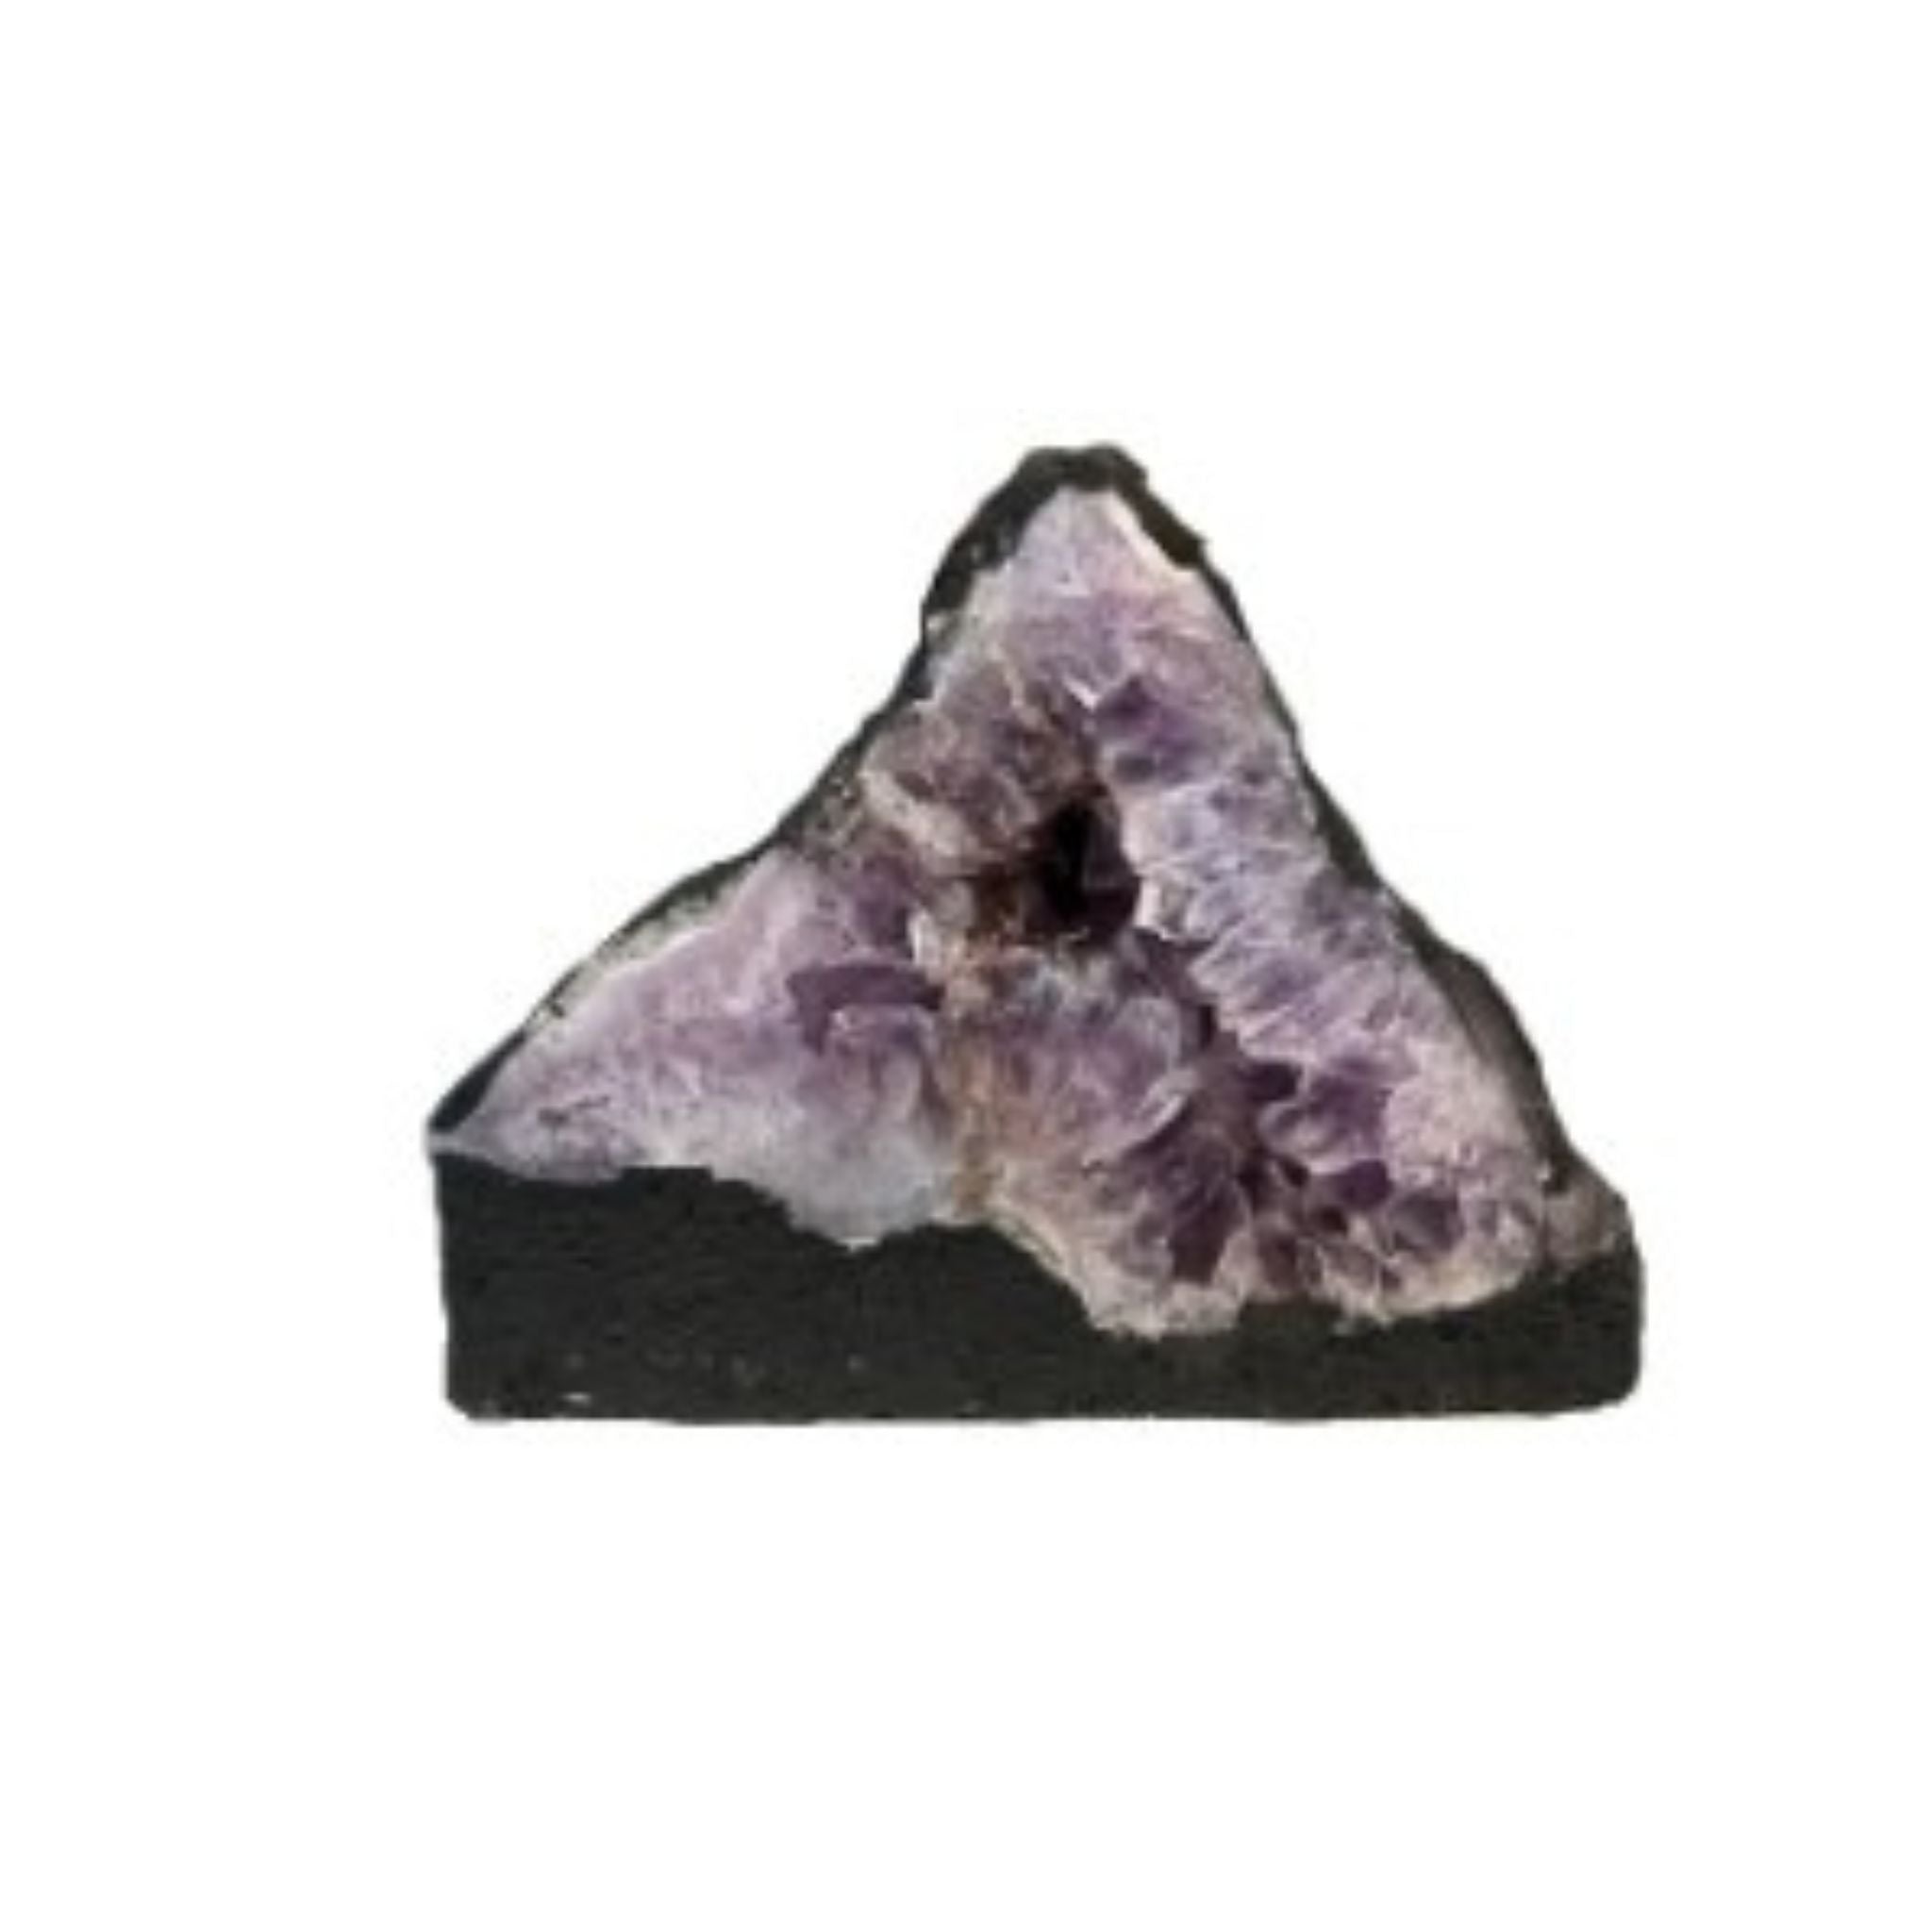 Our cathedrals are cut from natural stalactite and stalagmite formations found in the caves of Brazil. Gorgeous purple towers are luxurious amethyst. 